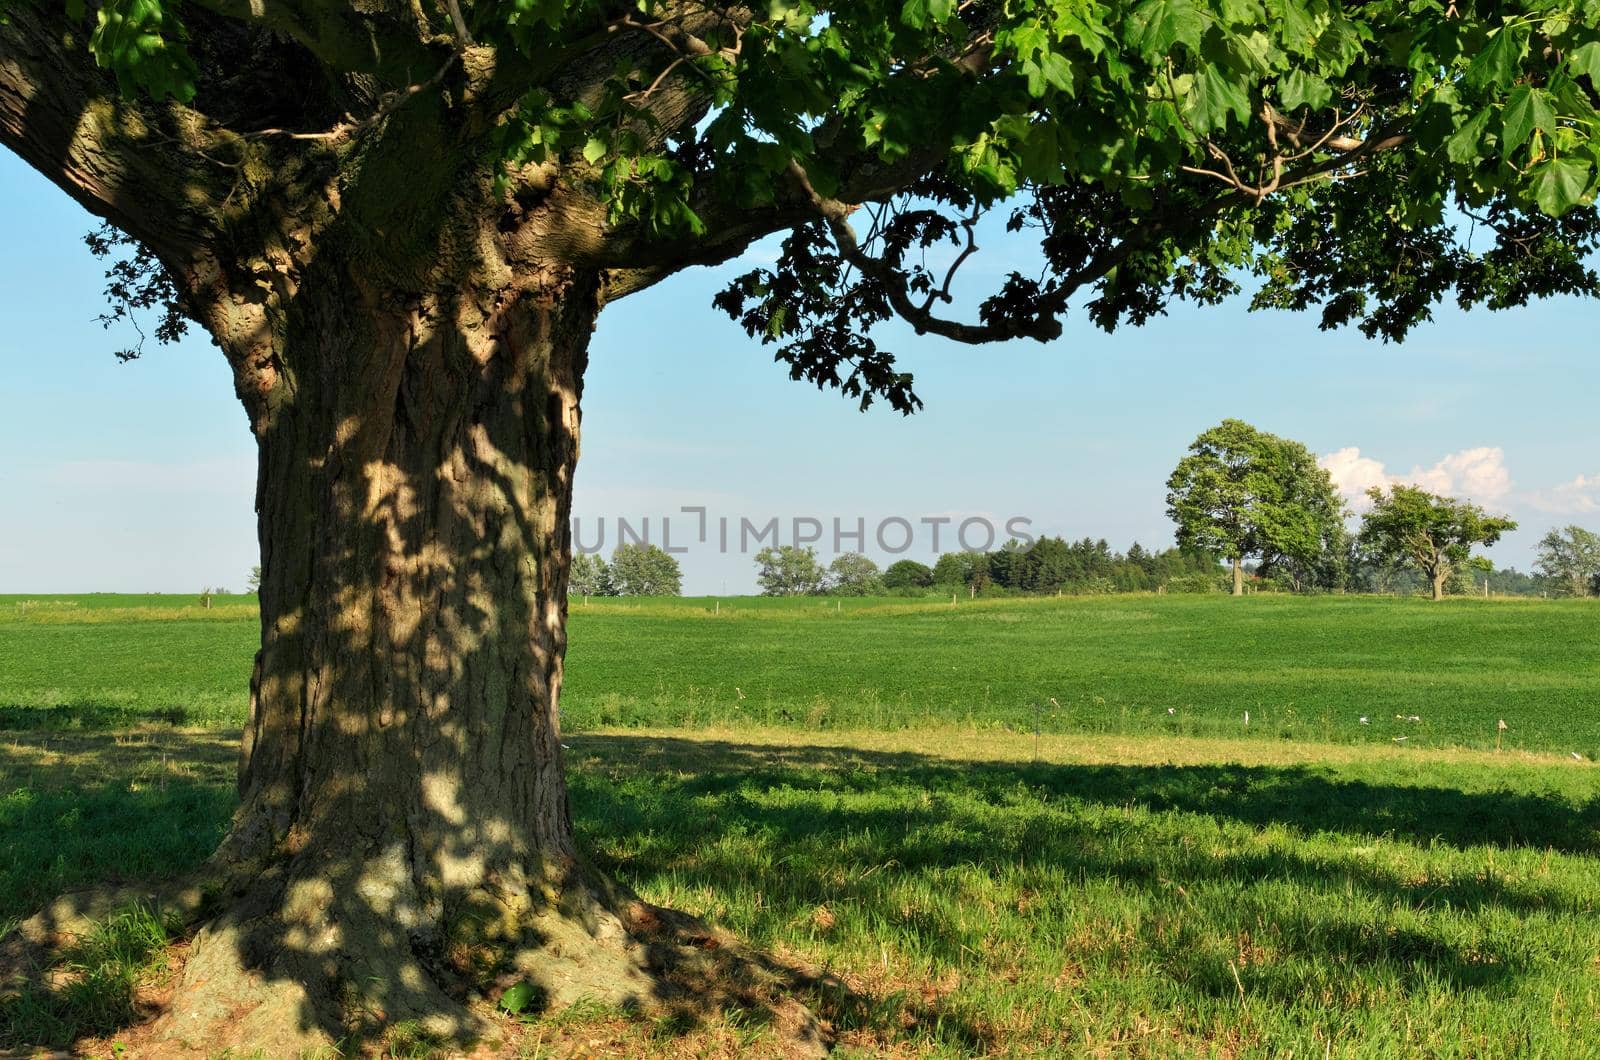 Idyllic Summer Scene at a Farm with Giant Maple Tree and Green Pastures on a Sunny Day by markvandam